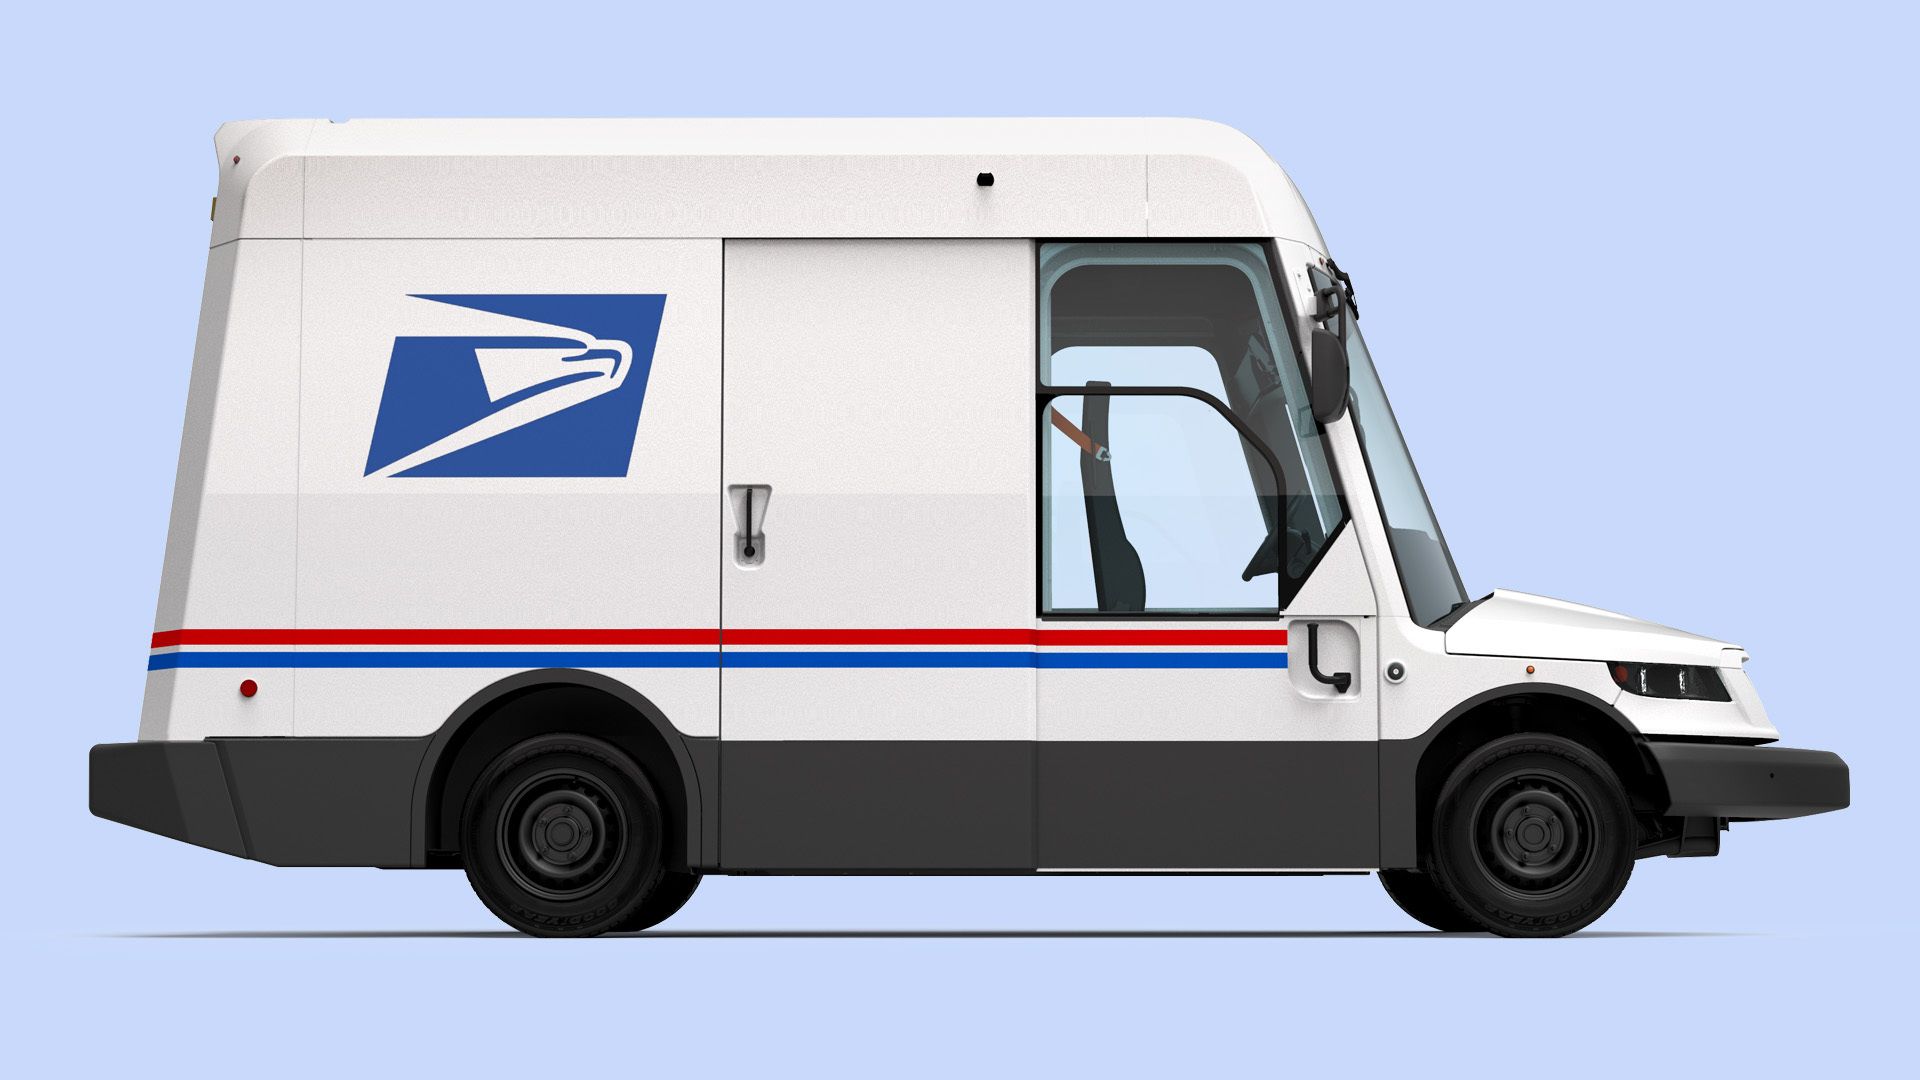 Image of the USPS next-generation delivery truck.